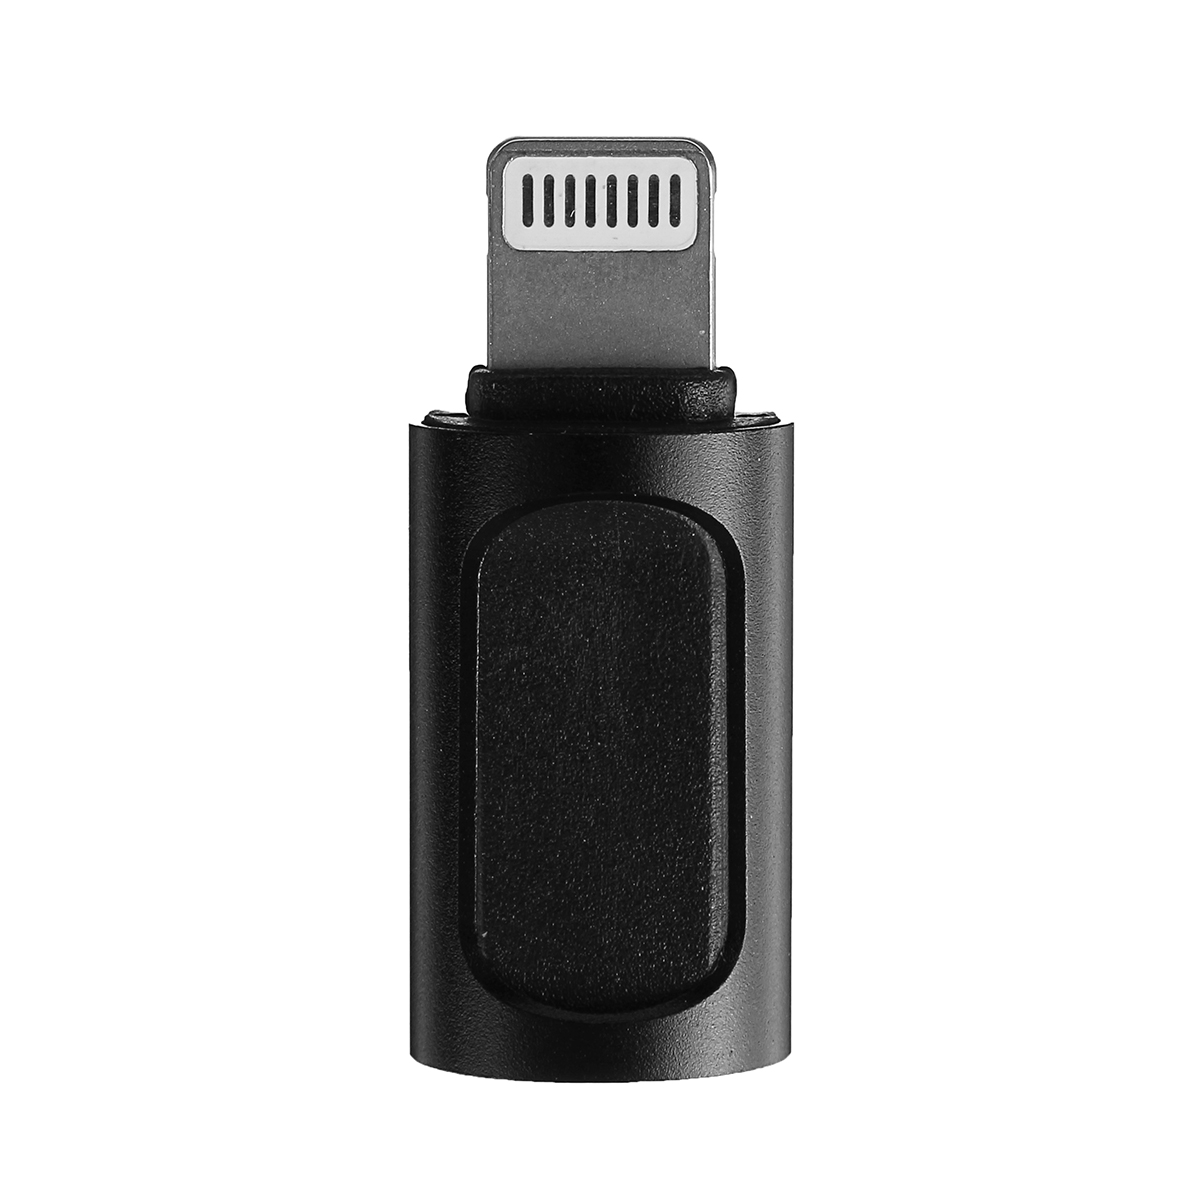 Find E300 Wireless Microphone Lavalier MIC Adapter Professional Recording Live Streaming Game for iPhone Android PC Computer for Sale on Gipsybee.com with cryptocurrencies